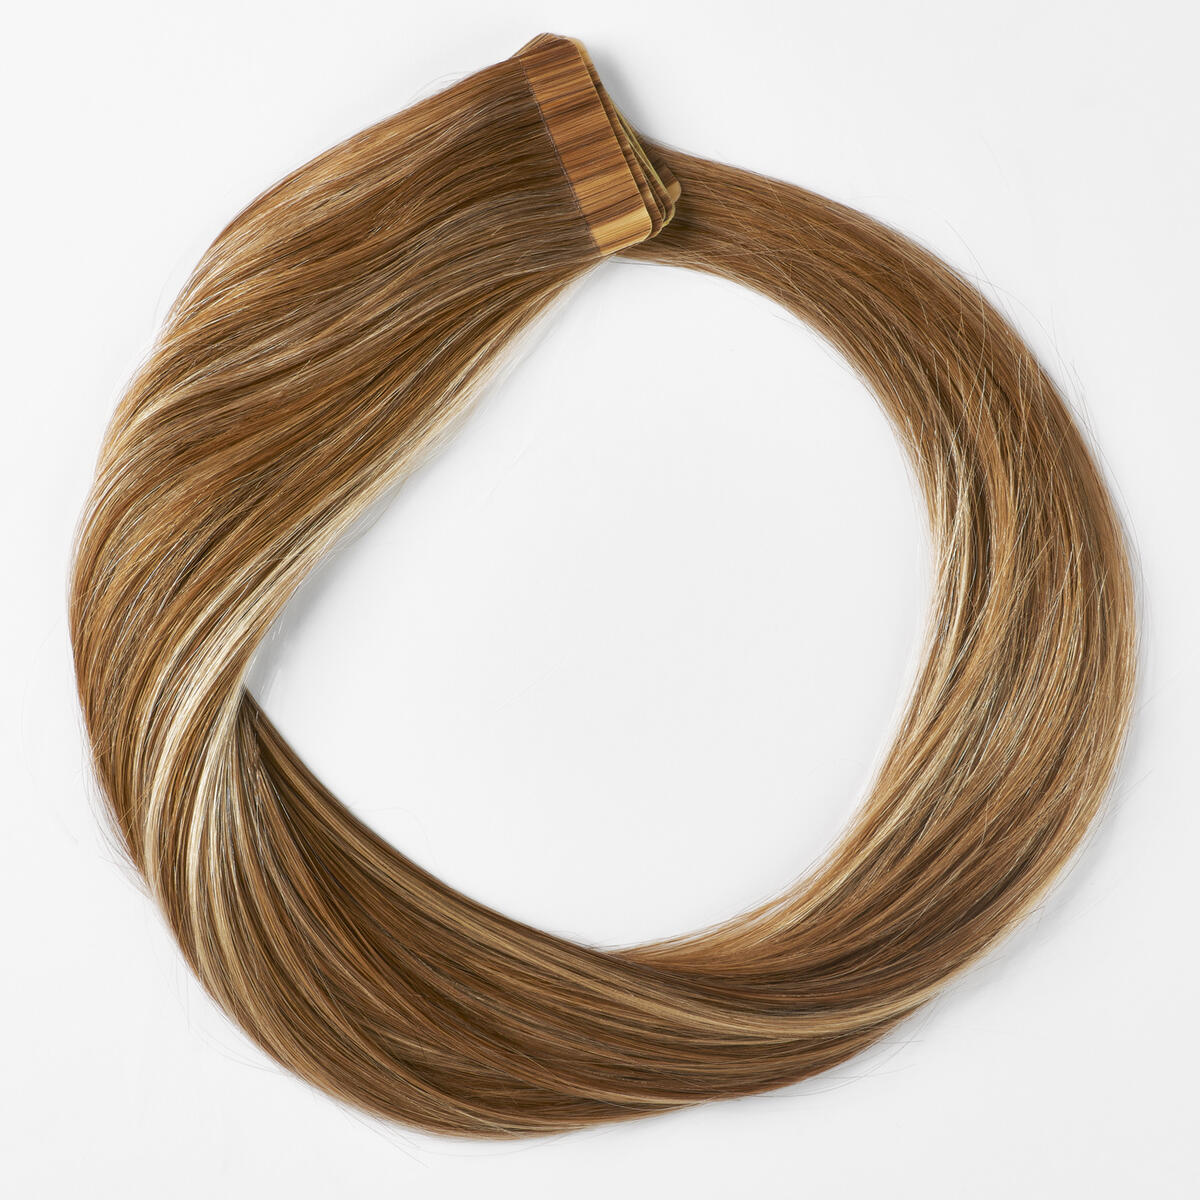 Basic Tape Extensions Classic 4 M5.4/7.8 Strawberry Brown Mix 40 cm